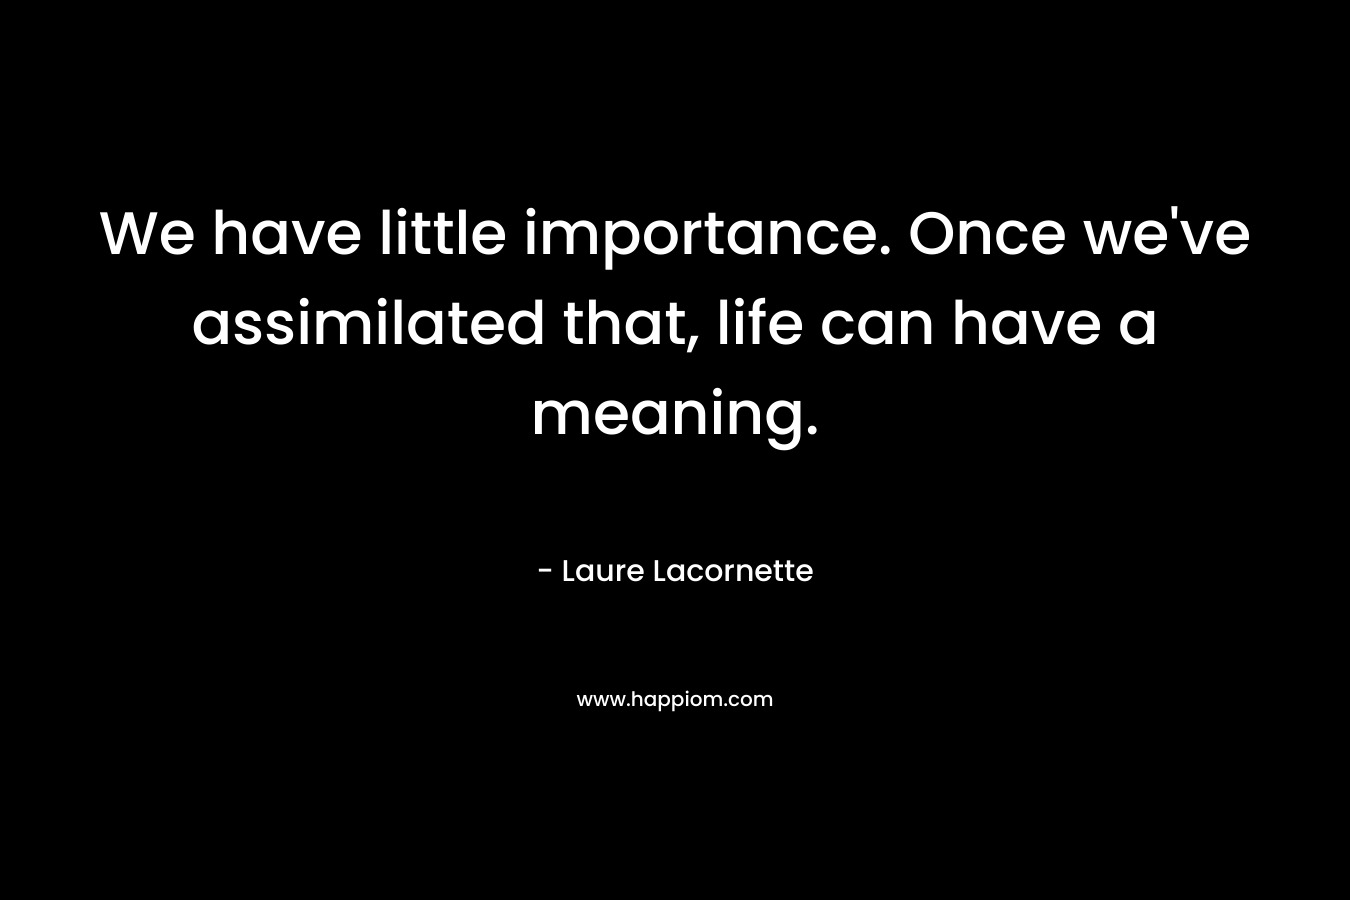 We have little importance. Once we’ve assimilated that, life can have a meaning. – Laure Lacornette